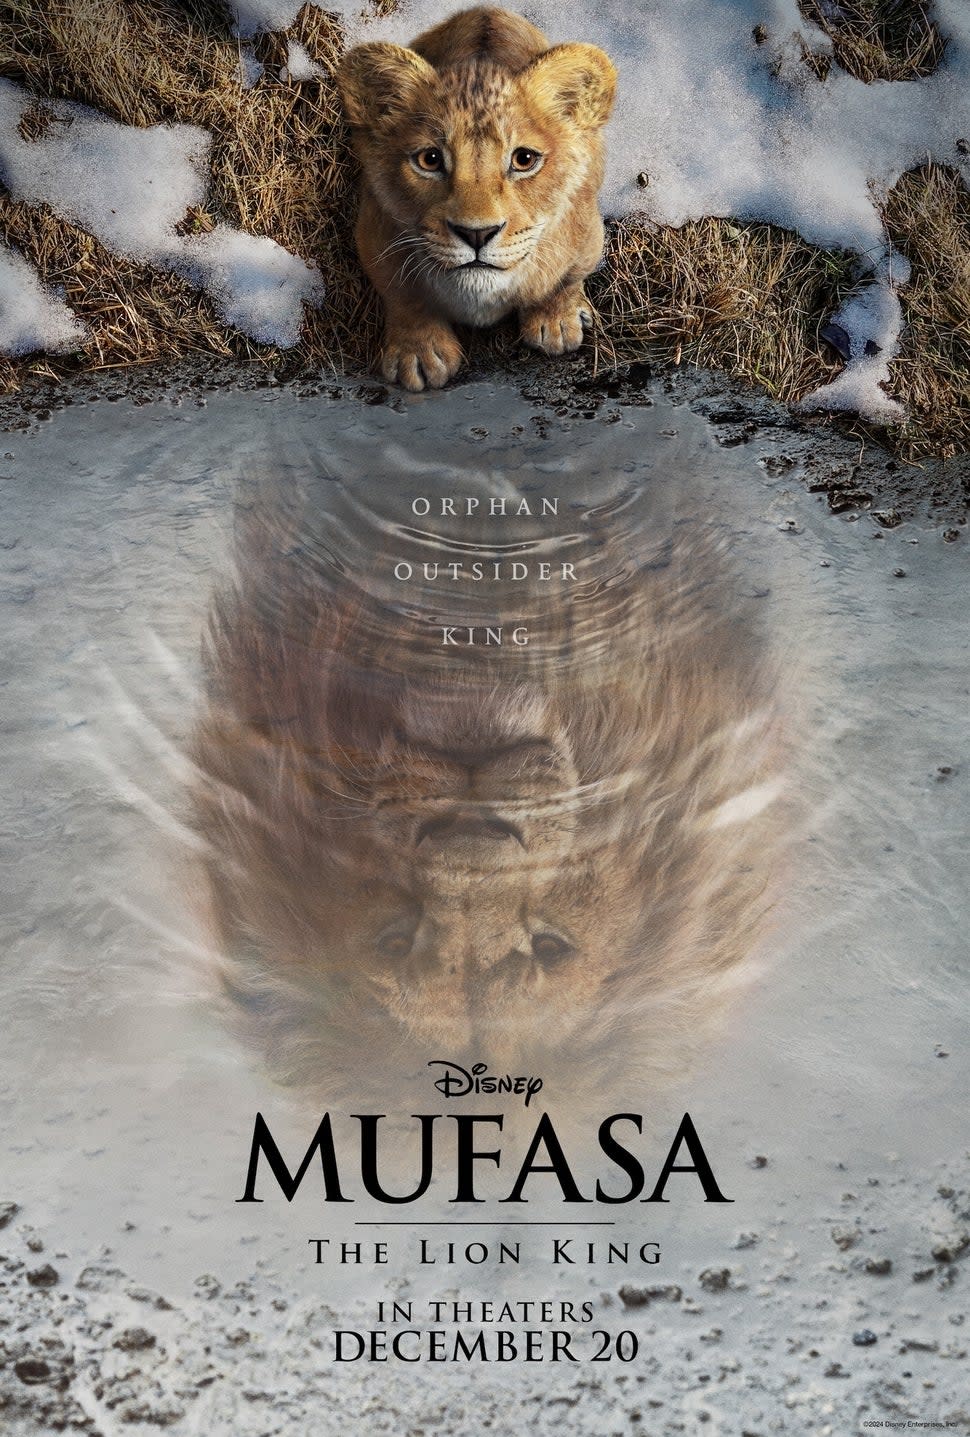 'Mufasa: The Lion King' movie poster